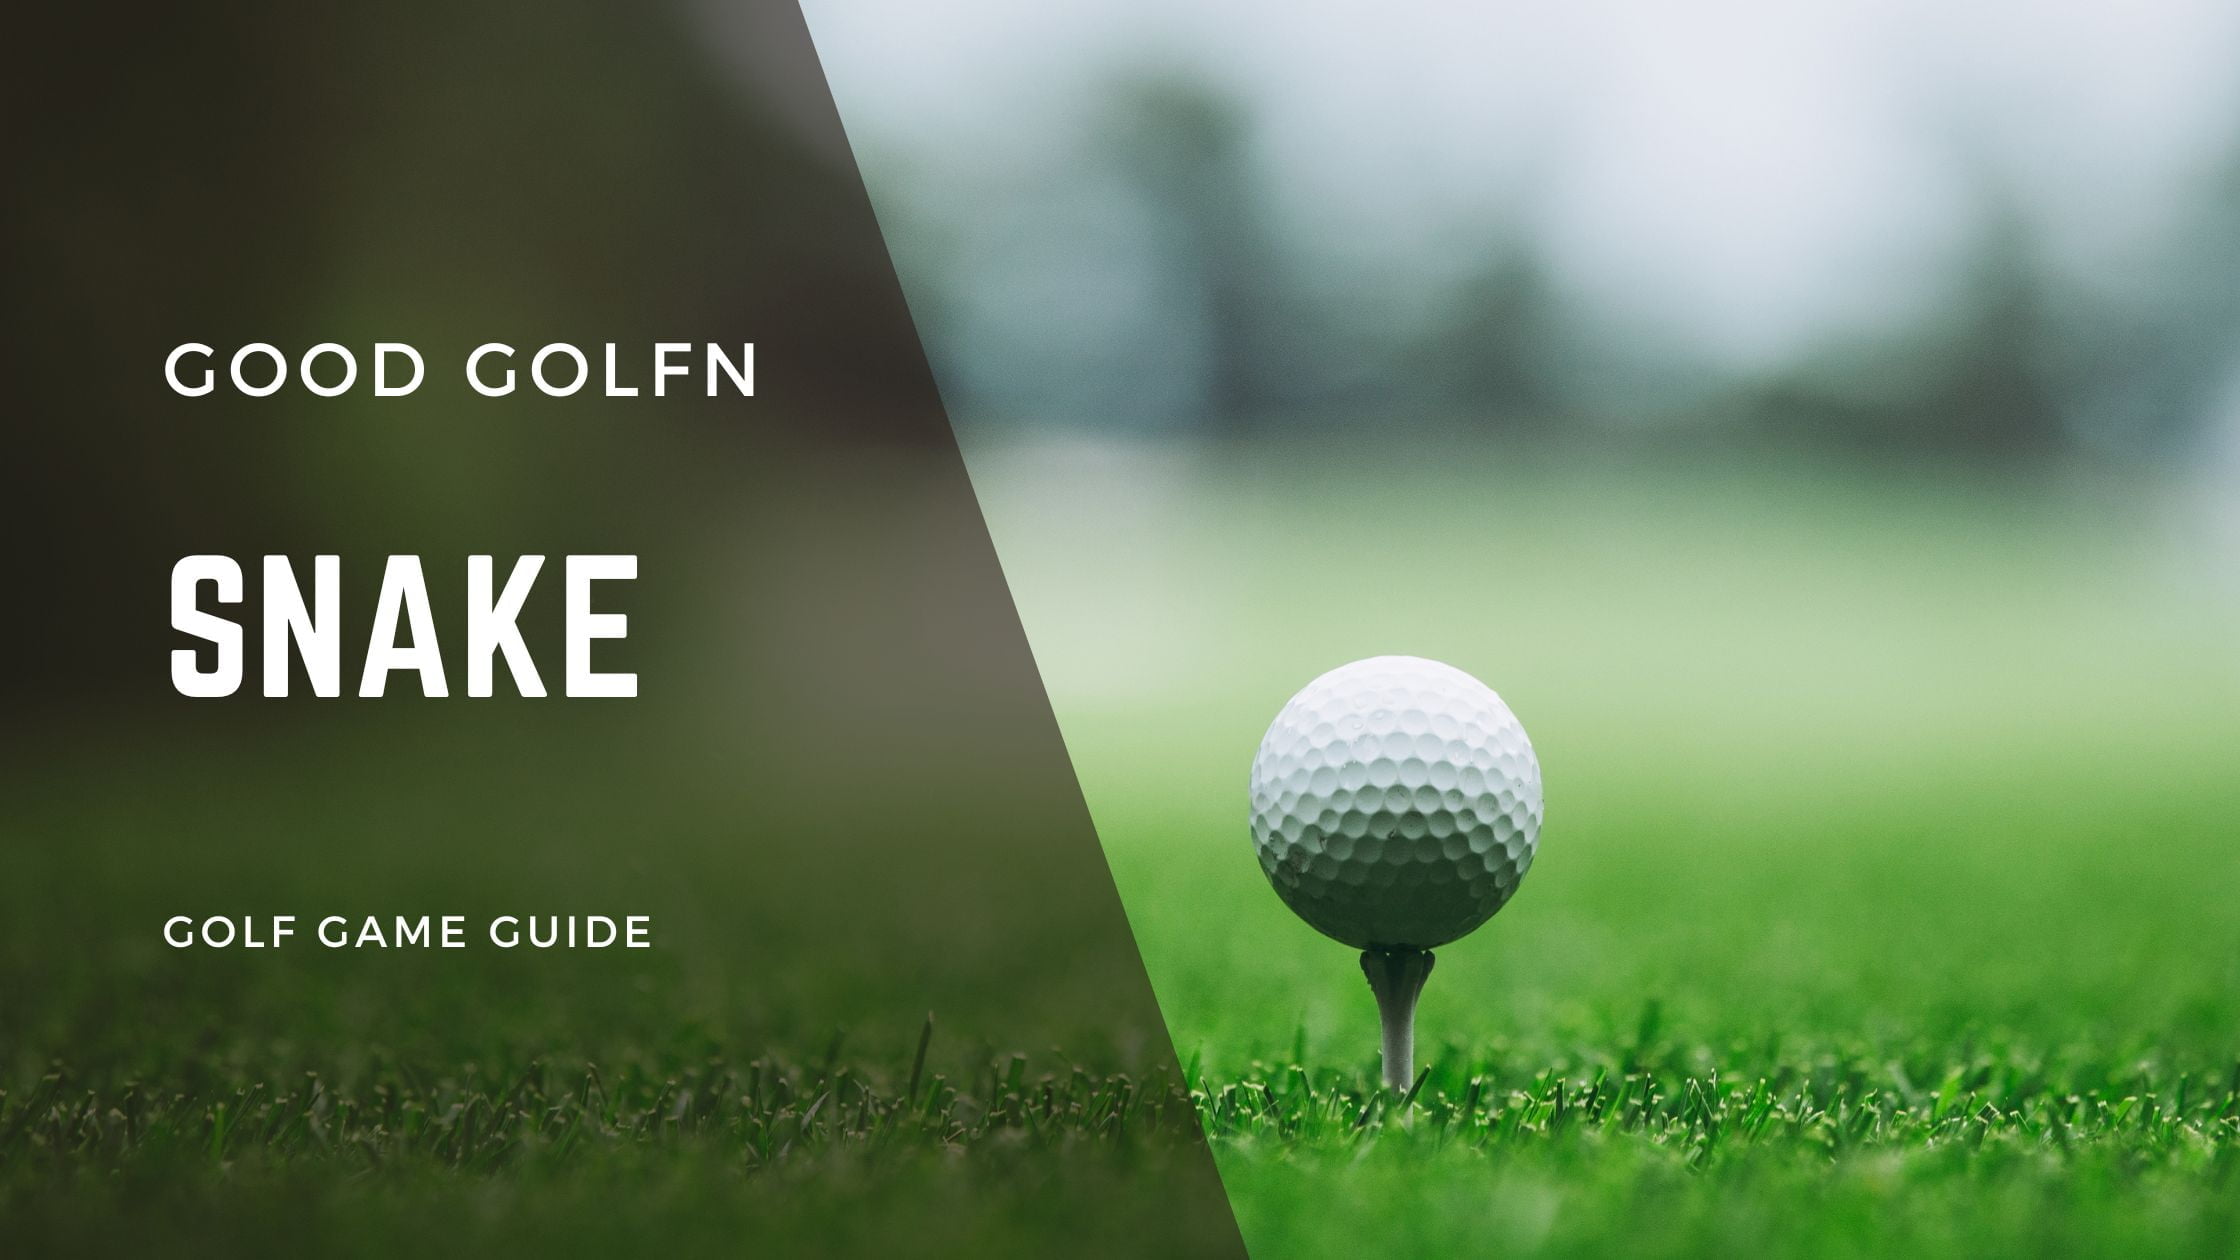 Explore the intriguing world of golf side games! Dive into snake golf, unravel the $5 Nassau mystery, and master putting techniques.